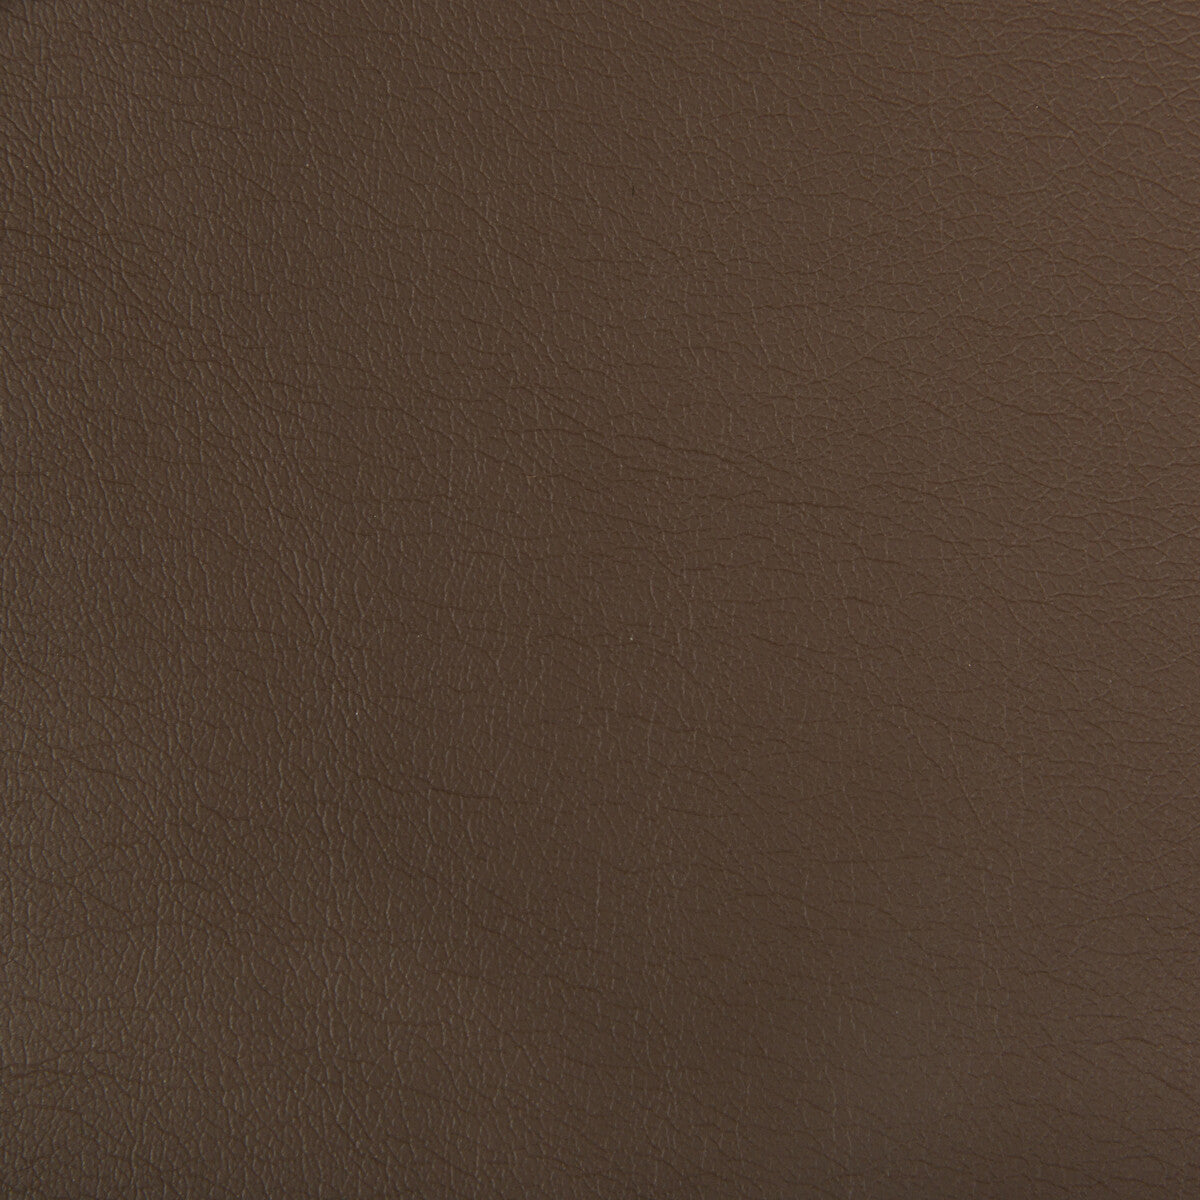 Optima fabric in pecan color - pattern OPTIMA.6.0 - by Kravet Contract